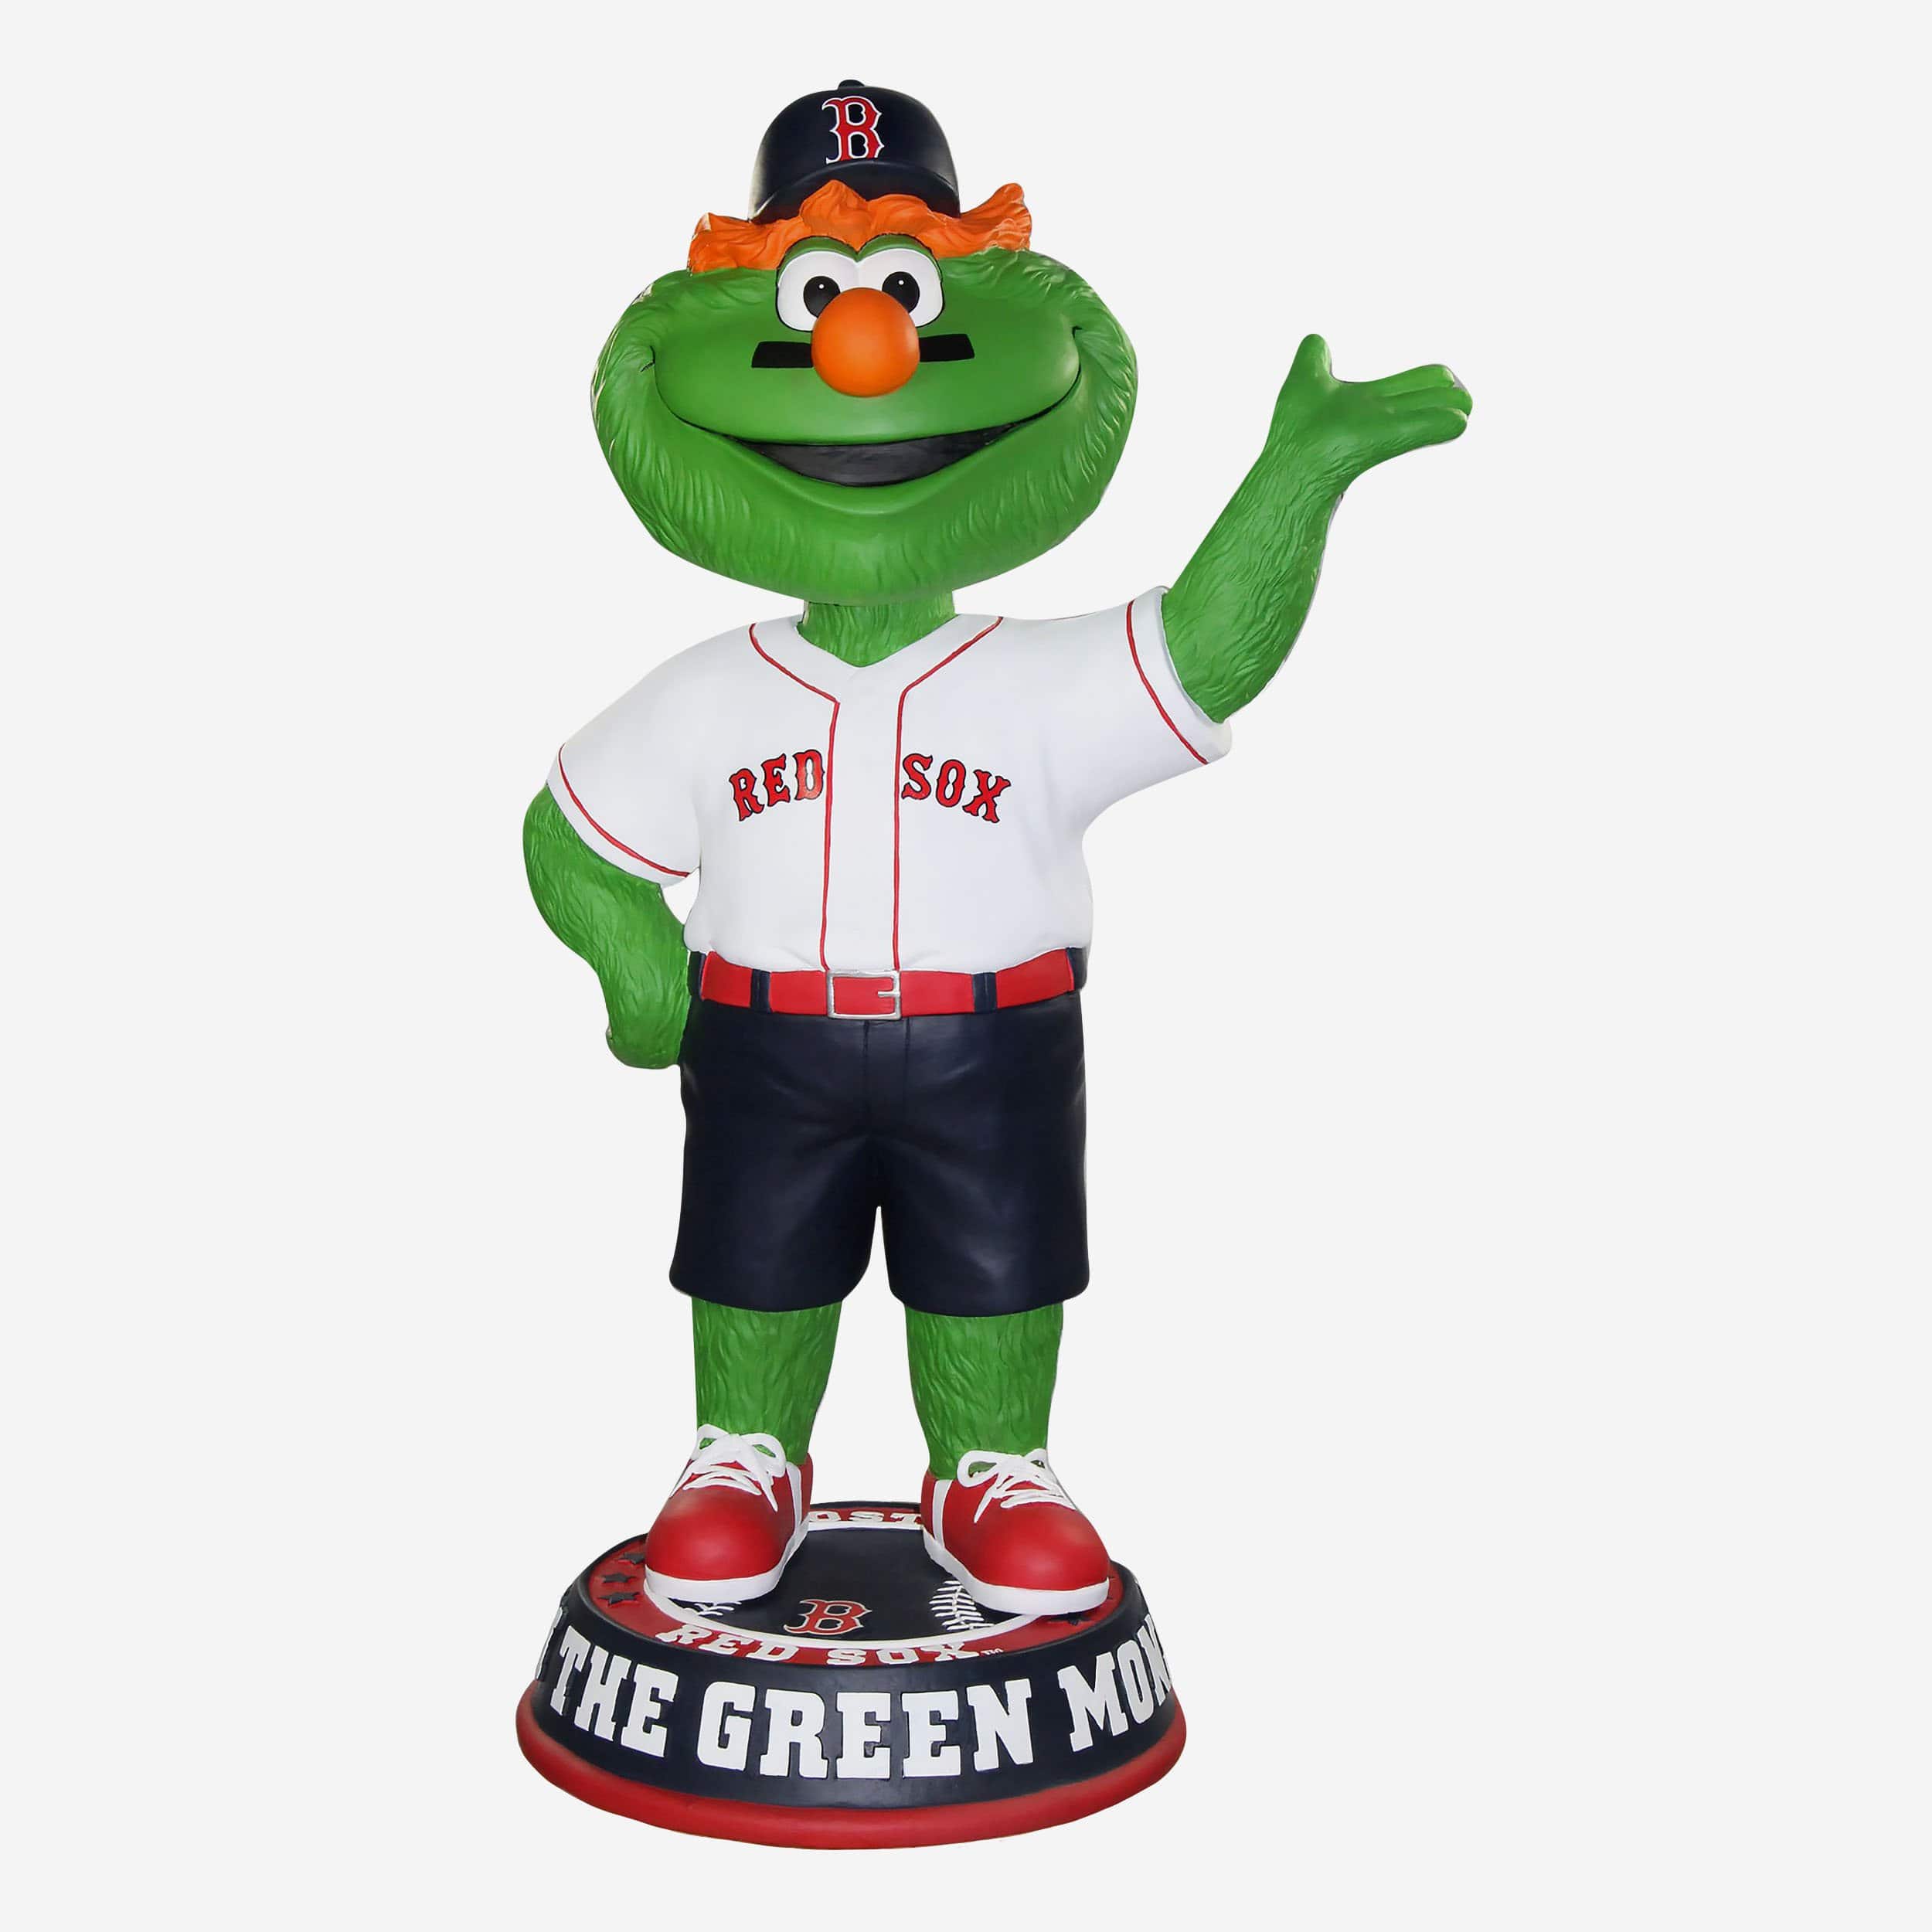 Wally The Green Monster Boston Red Sox 3 ft Mascot Bobblehead Officially Licensed by MLB